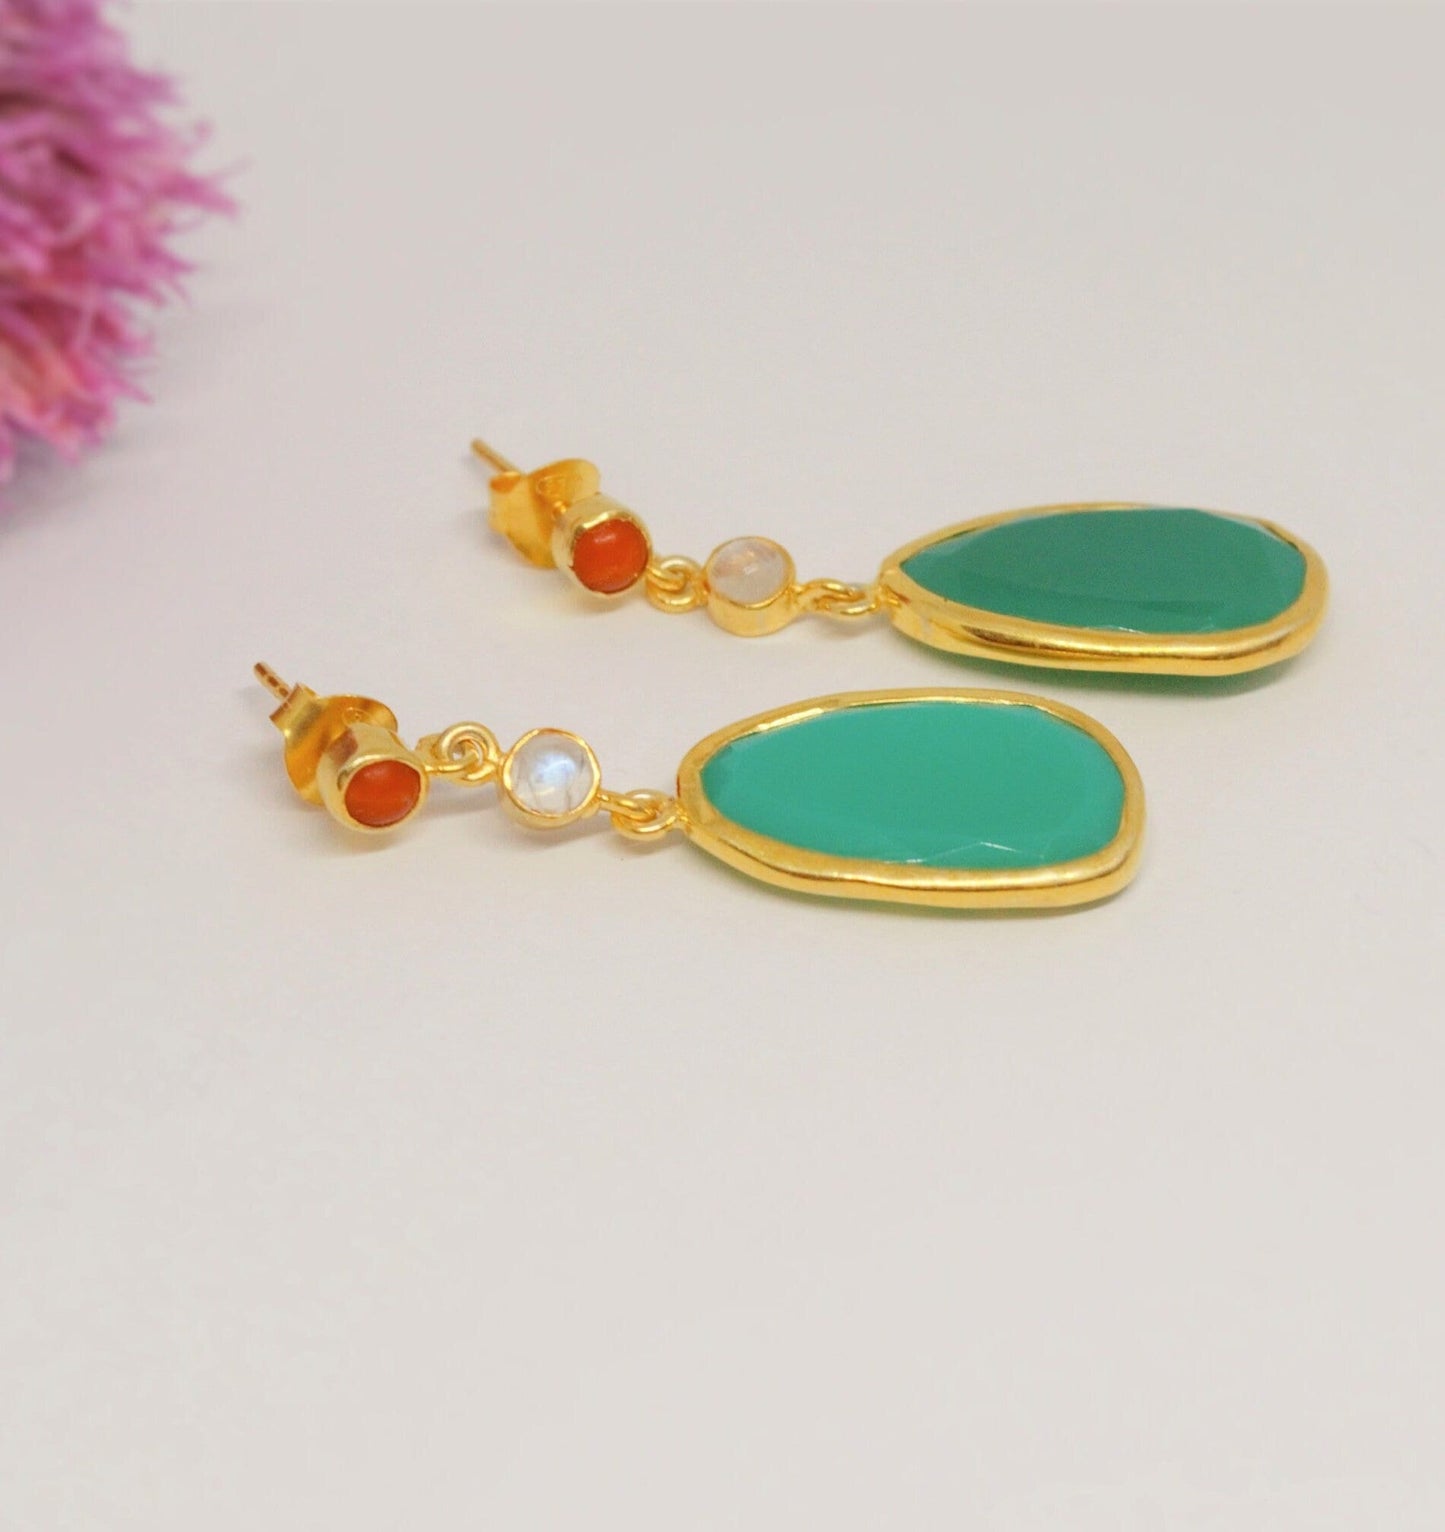 Chalcedony, Moonstone, Coral Earrings, Chalcedony Jewelry, Gold Plated 925 Sterling Silver Earrings, Green Earrings, Mothers Day Gift